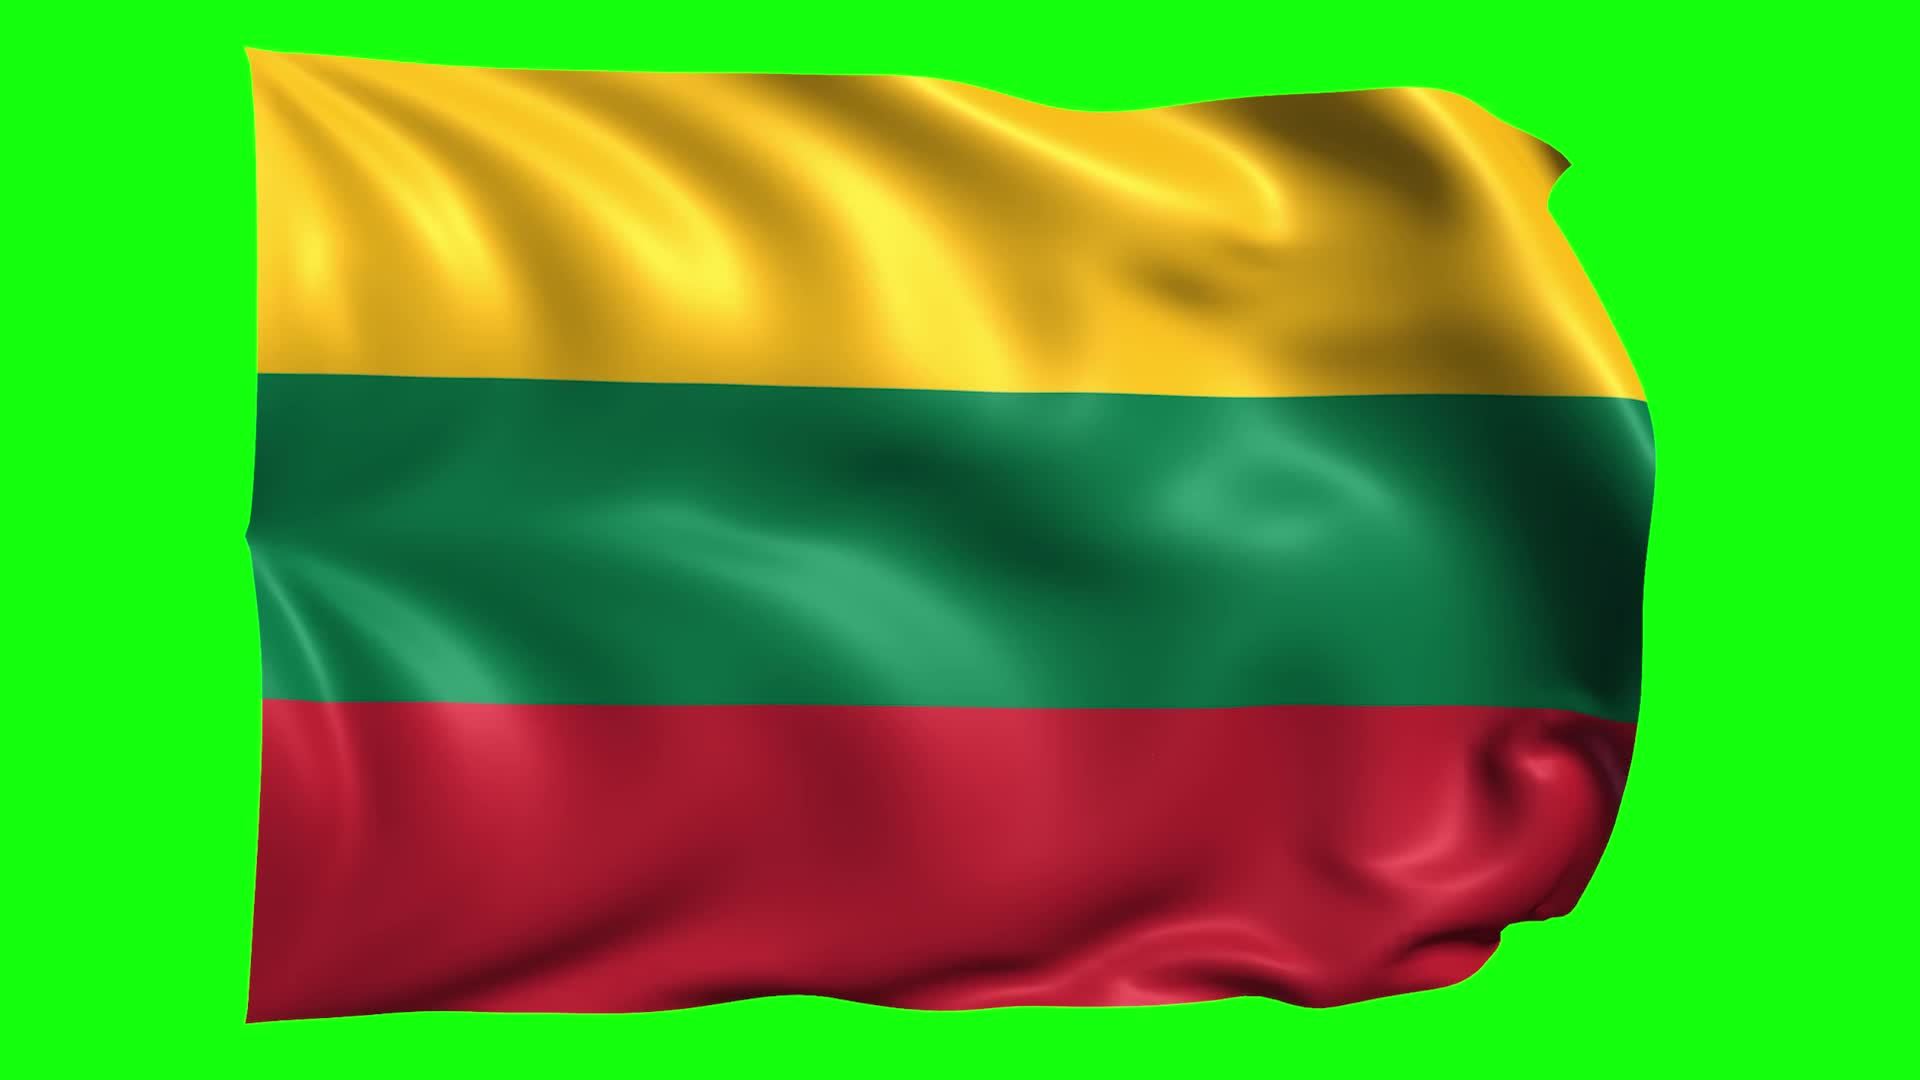 The iGaming Industry in Lithuania